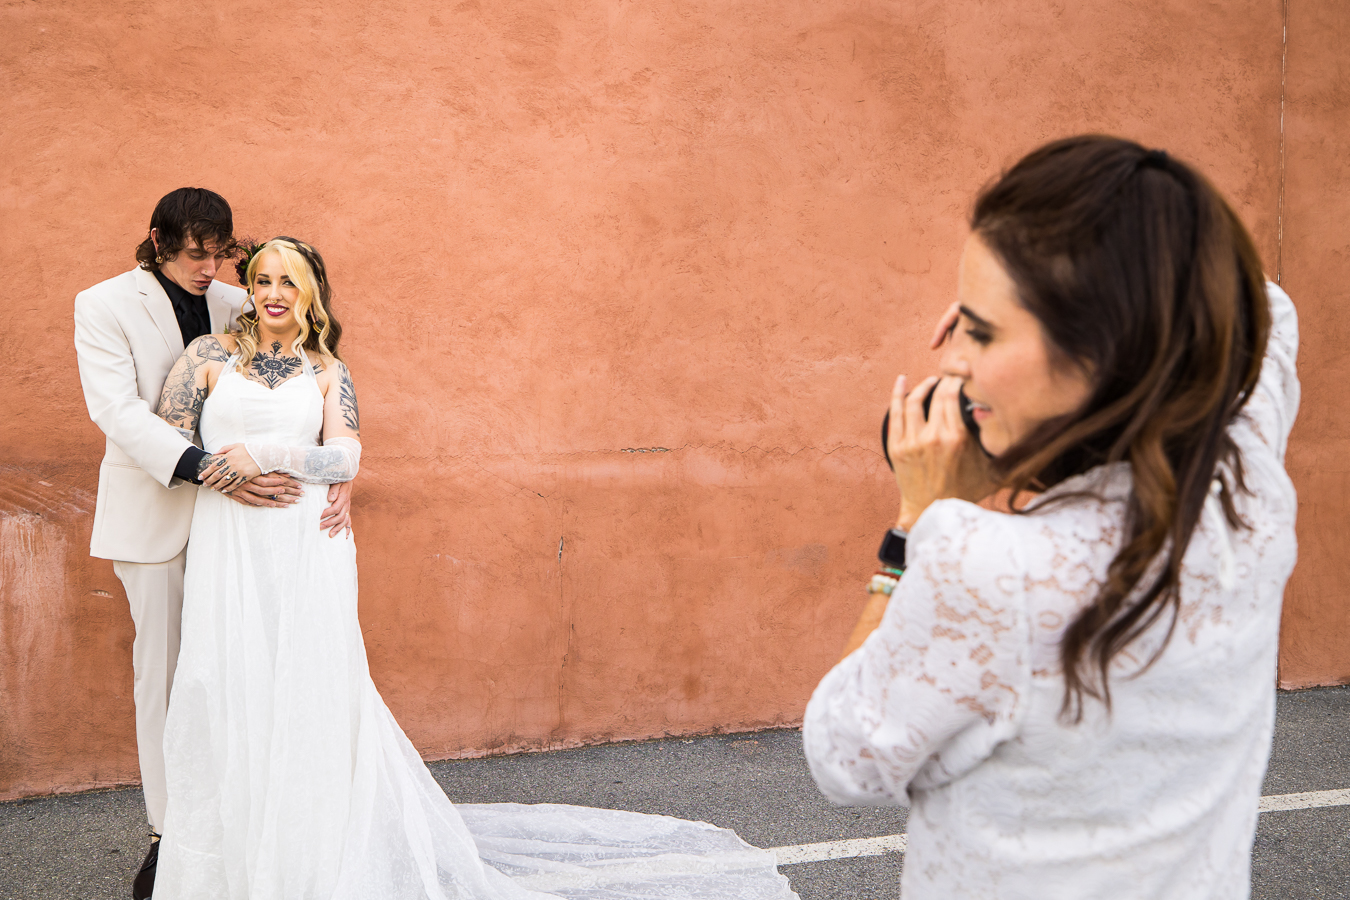 behind the scenes image of lisa rhinehart capturing the couple during their romantic portrait session in a parking lot against a terracotta colored wall